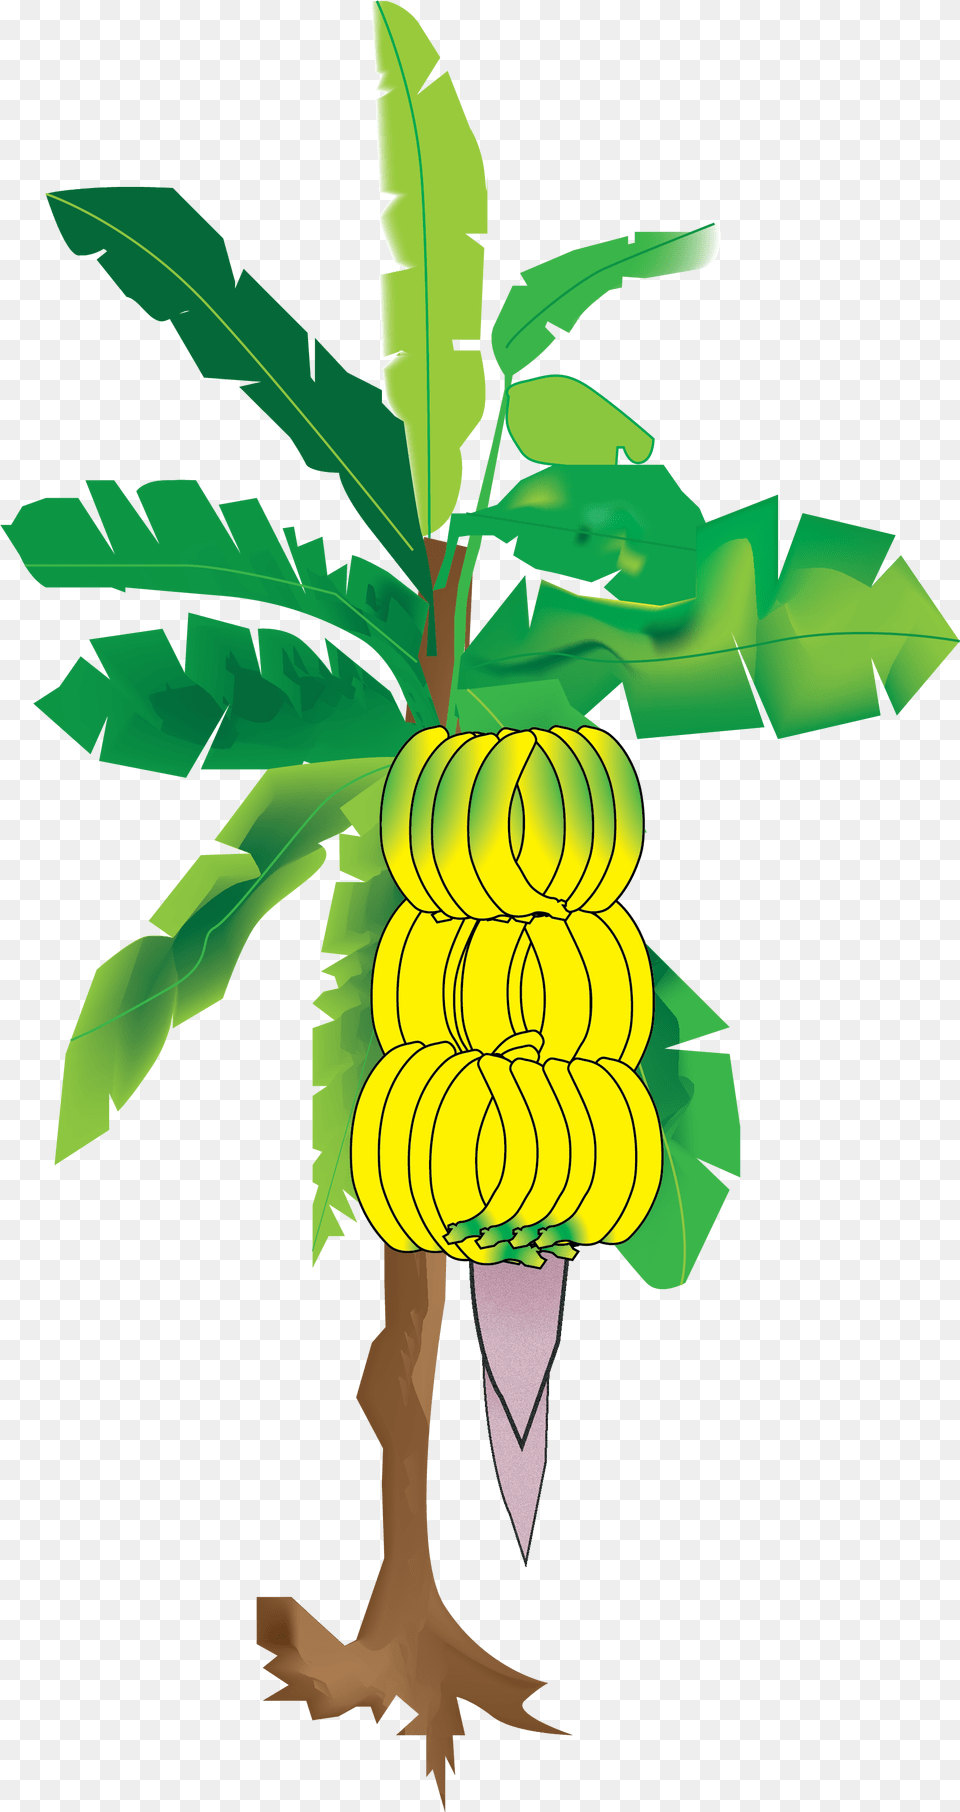 My Illustration Of The Banana Tree From Vector Banana Tree, Food, Fruit, Plant, Produce Png Image